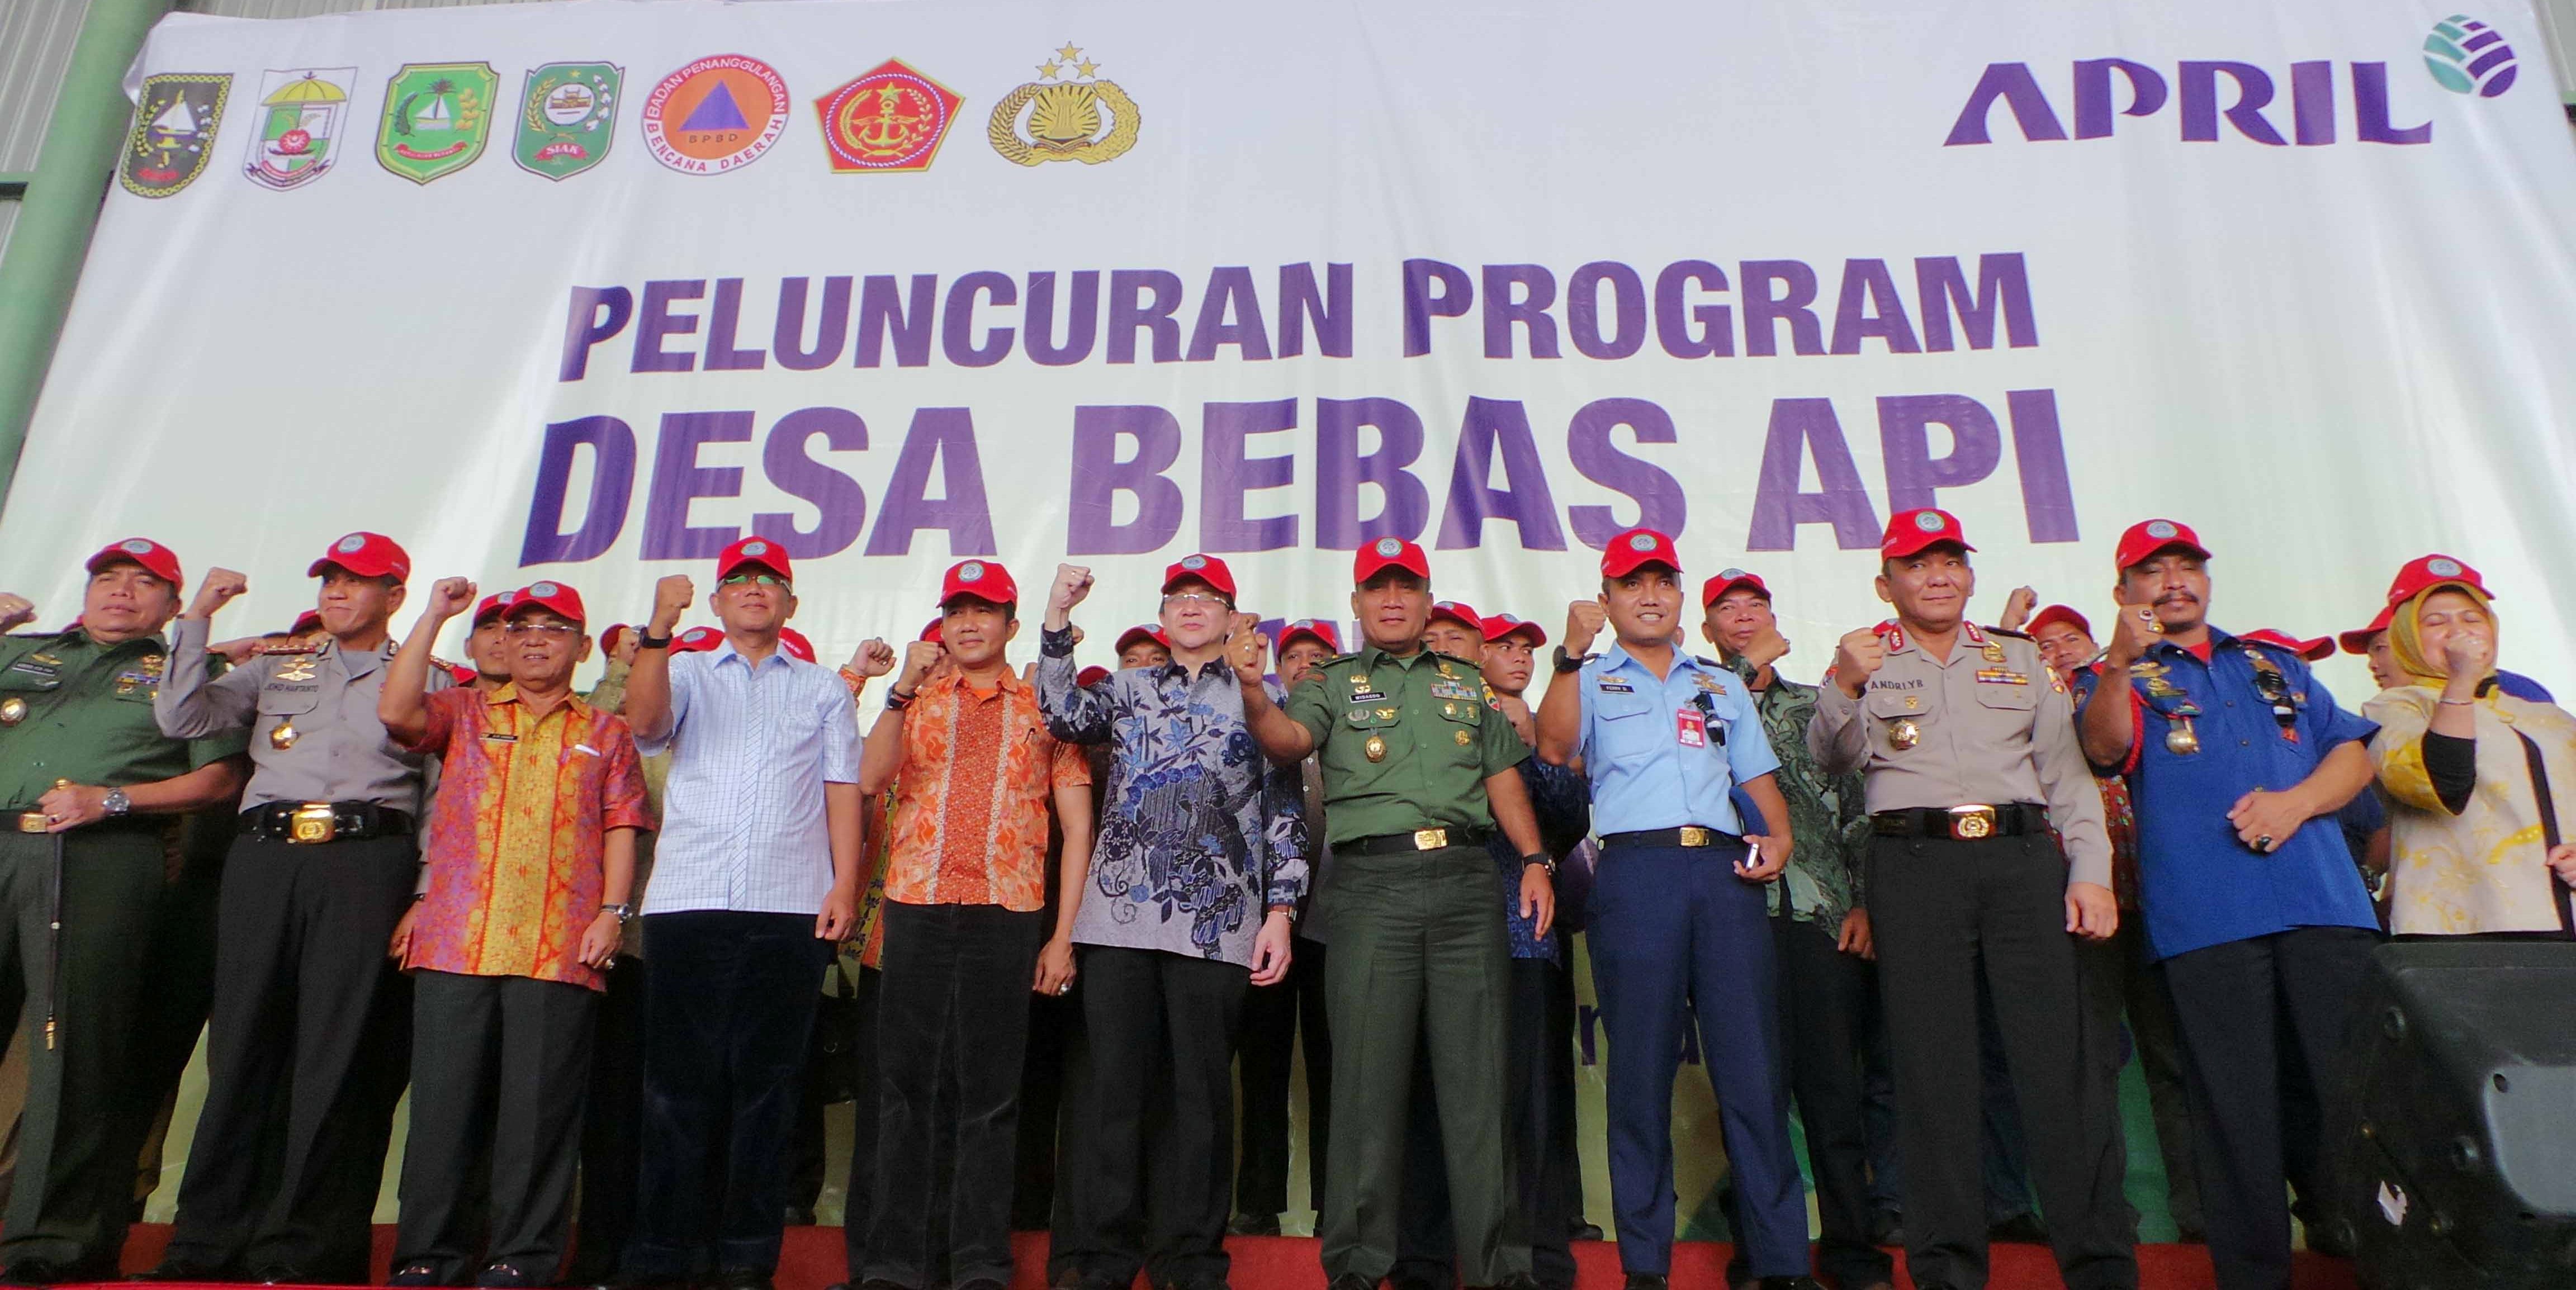 Fire Free Village Program (FFVP) 2016 Launch Event in Pangkalan Kerinci, Riau attended by participating village chiefs, civil society group representatives as well as Riau government and law enforcement officials